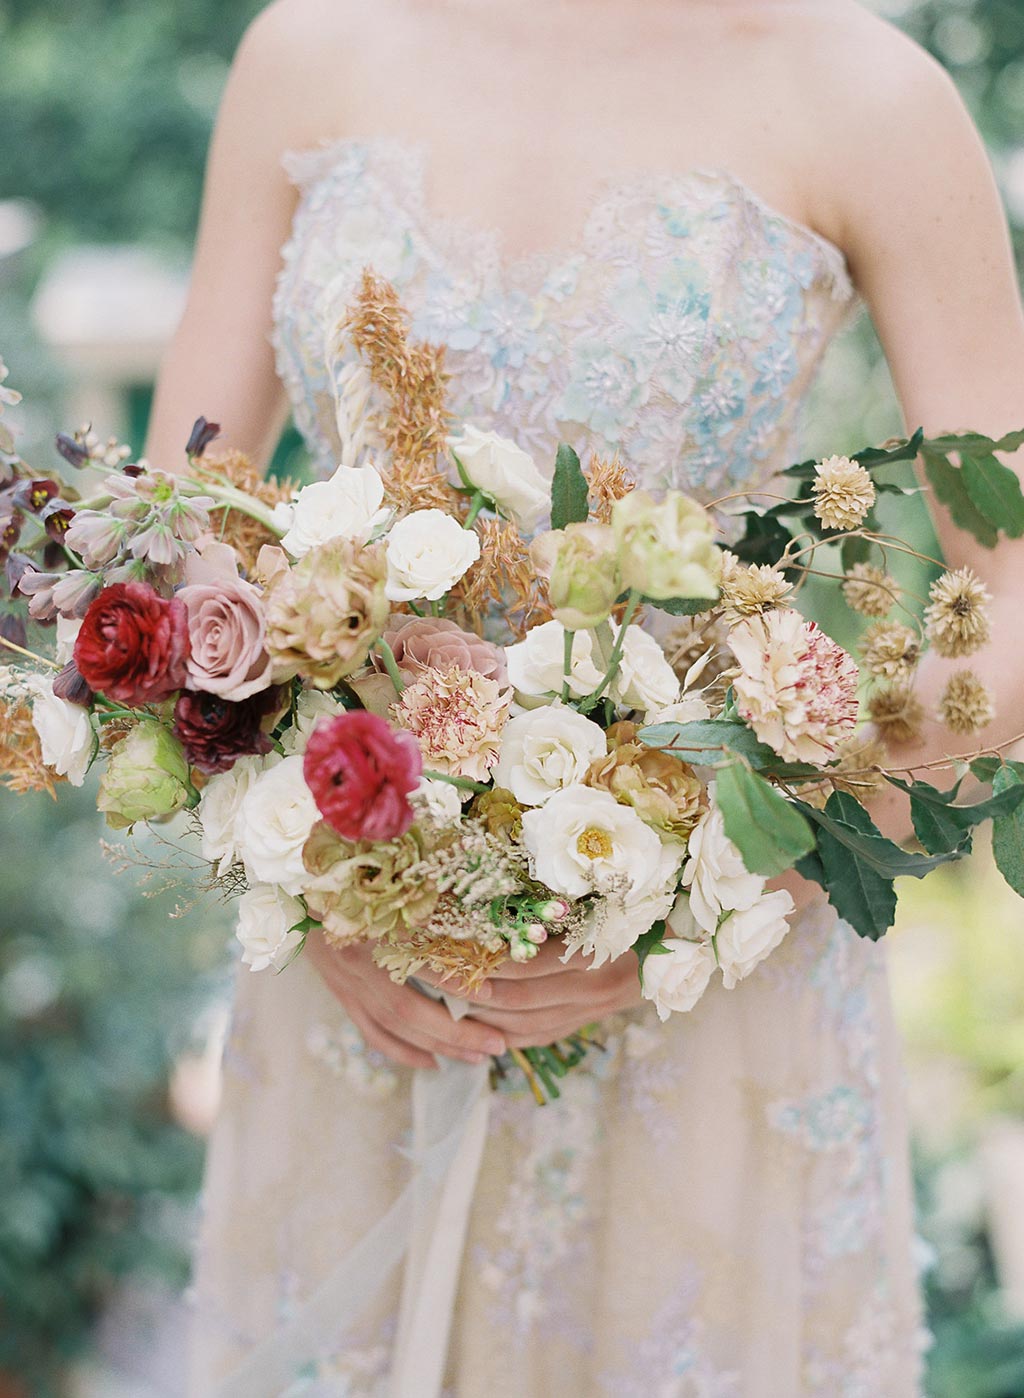 Ophelia by Claire Pettibone with wedding boquet